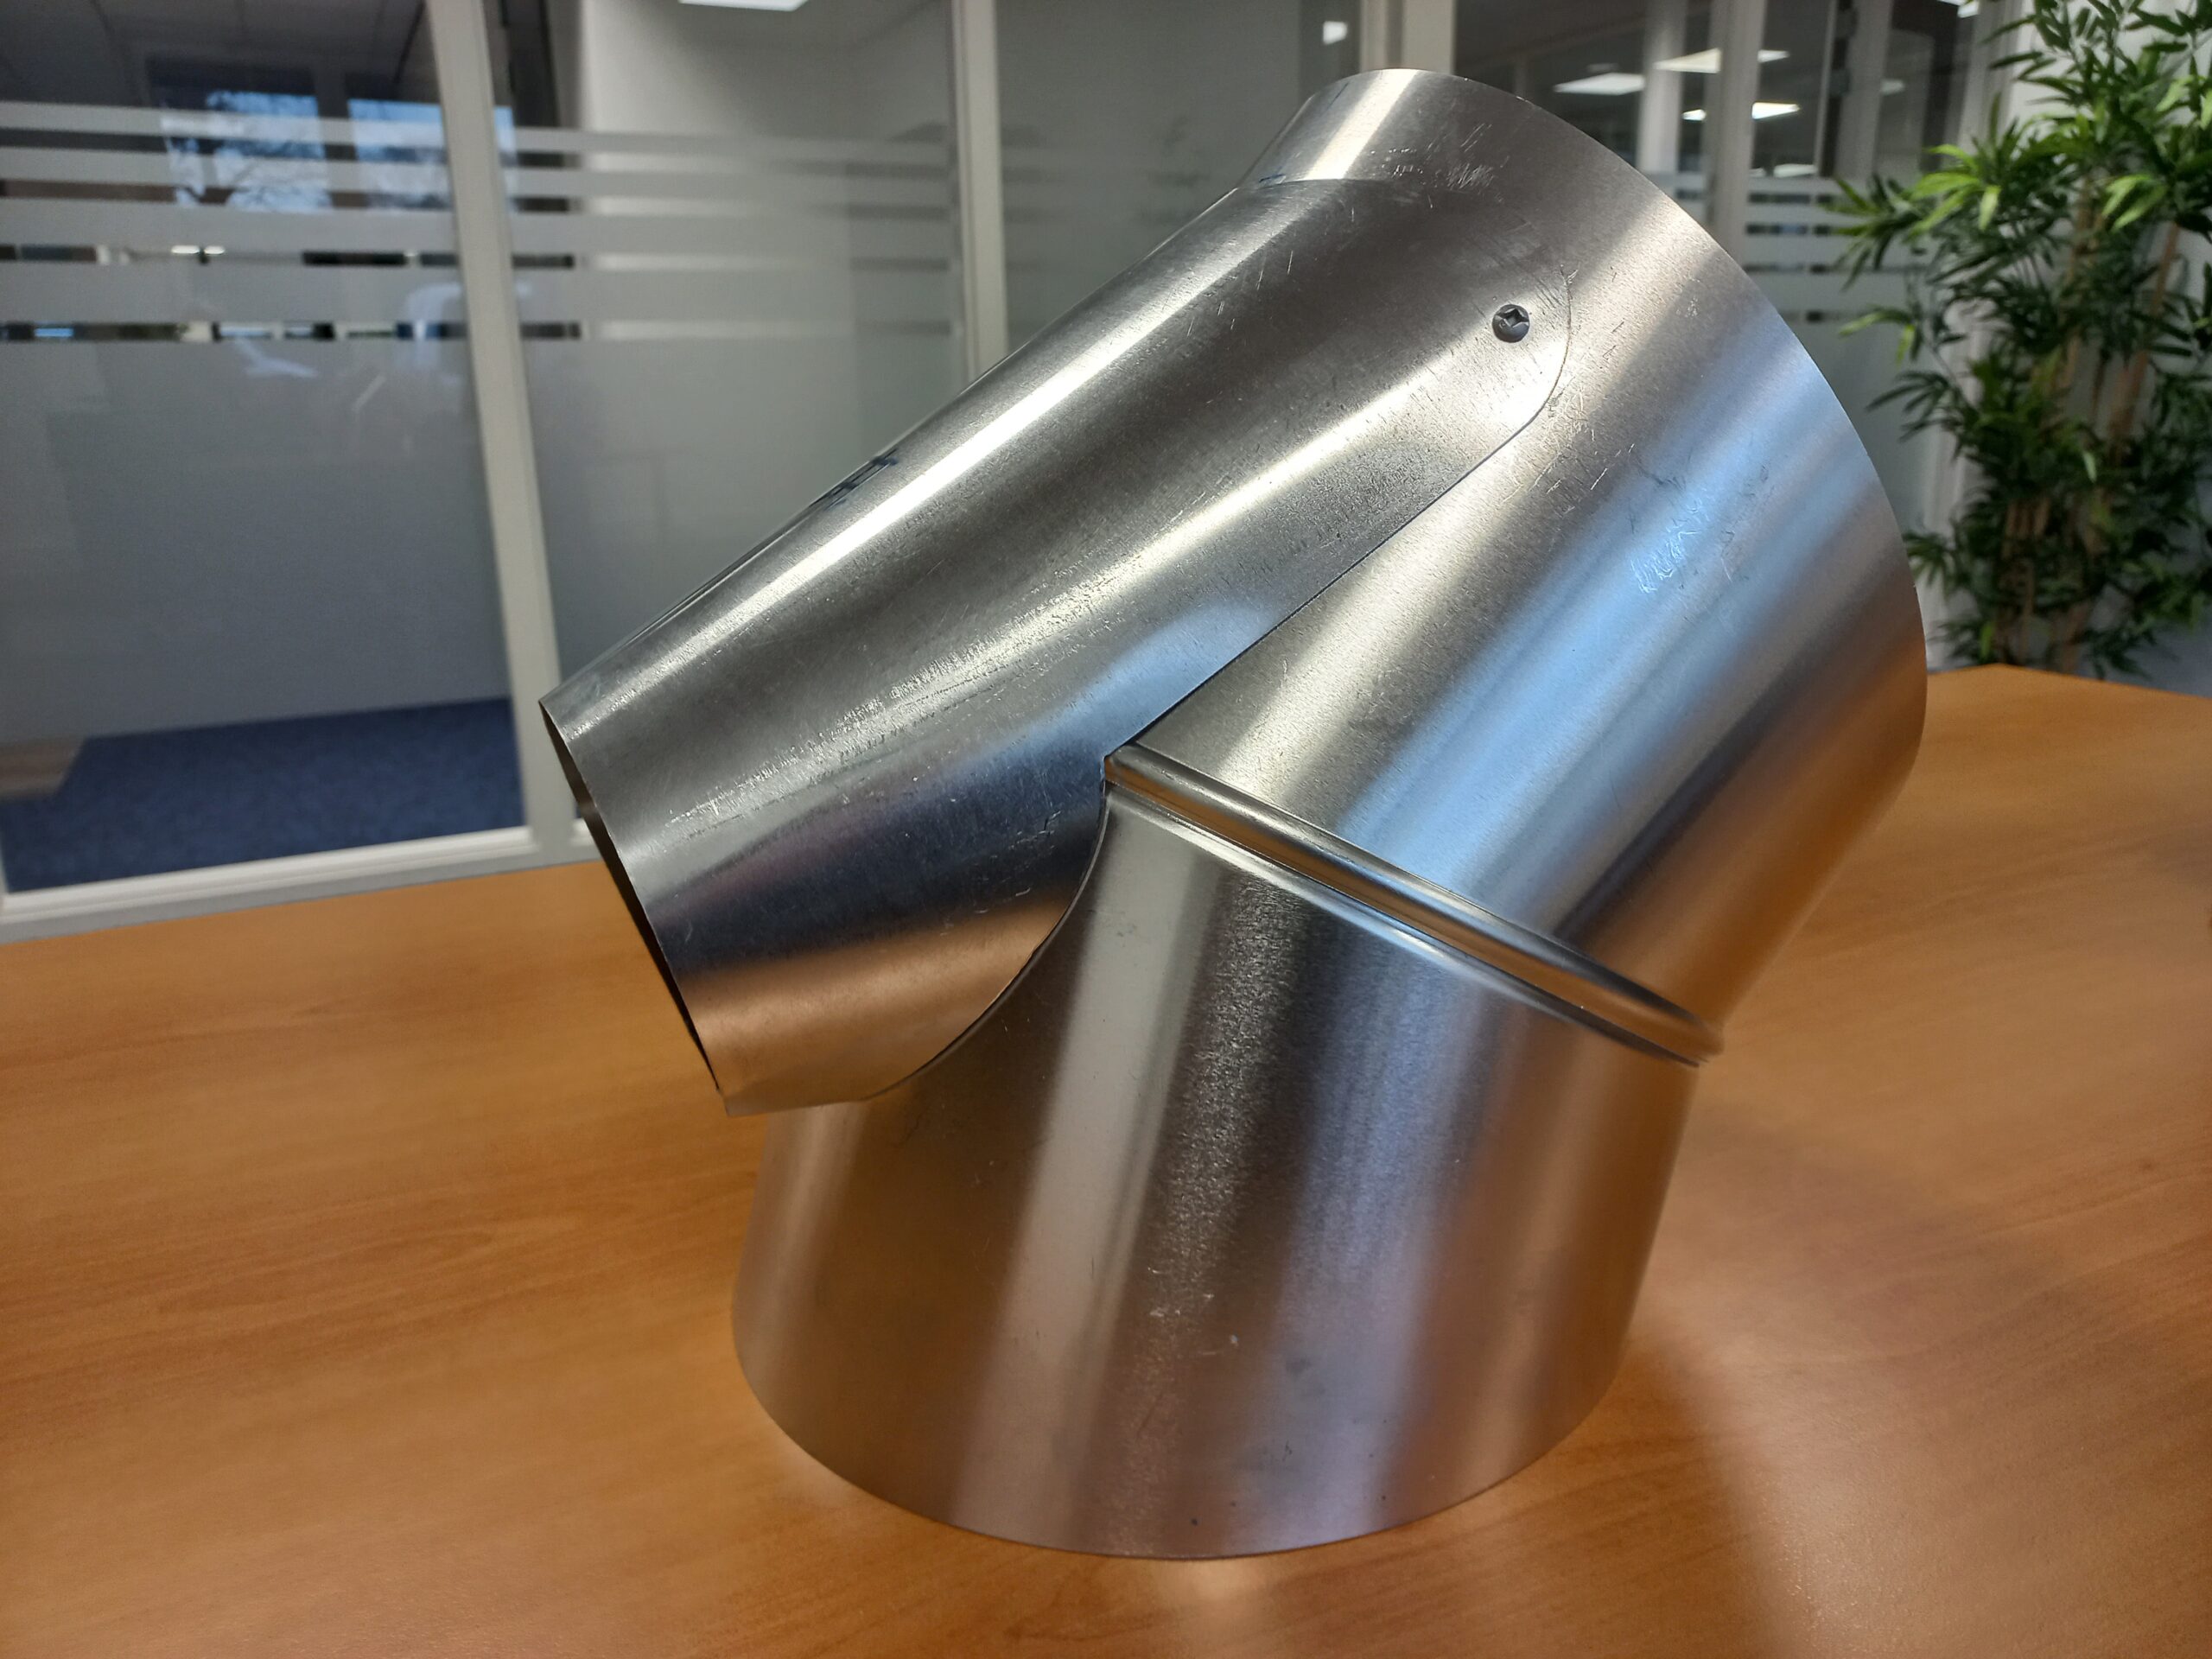 A cone with a diameter of 1000 mm that fits perfectly onto a bend of 2500 mm